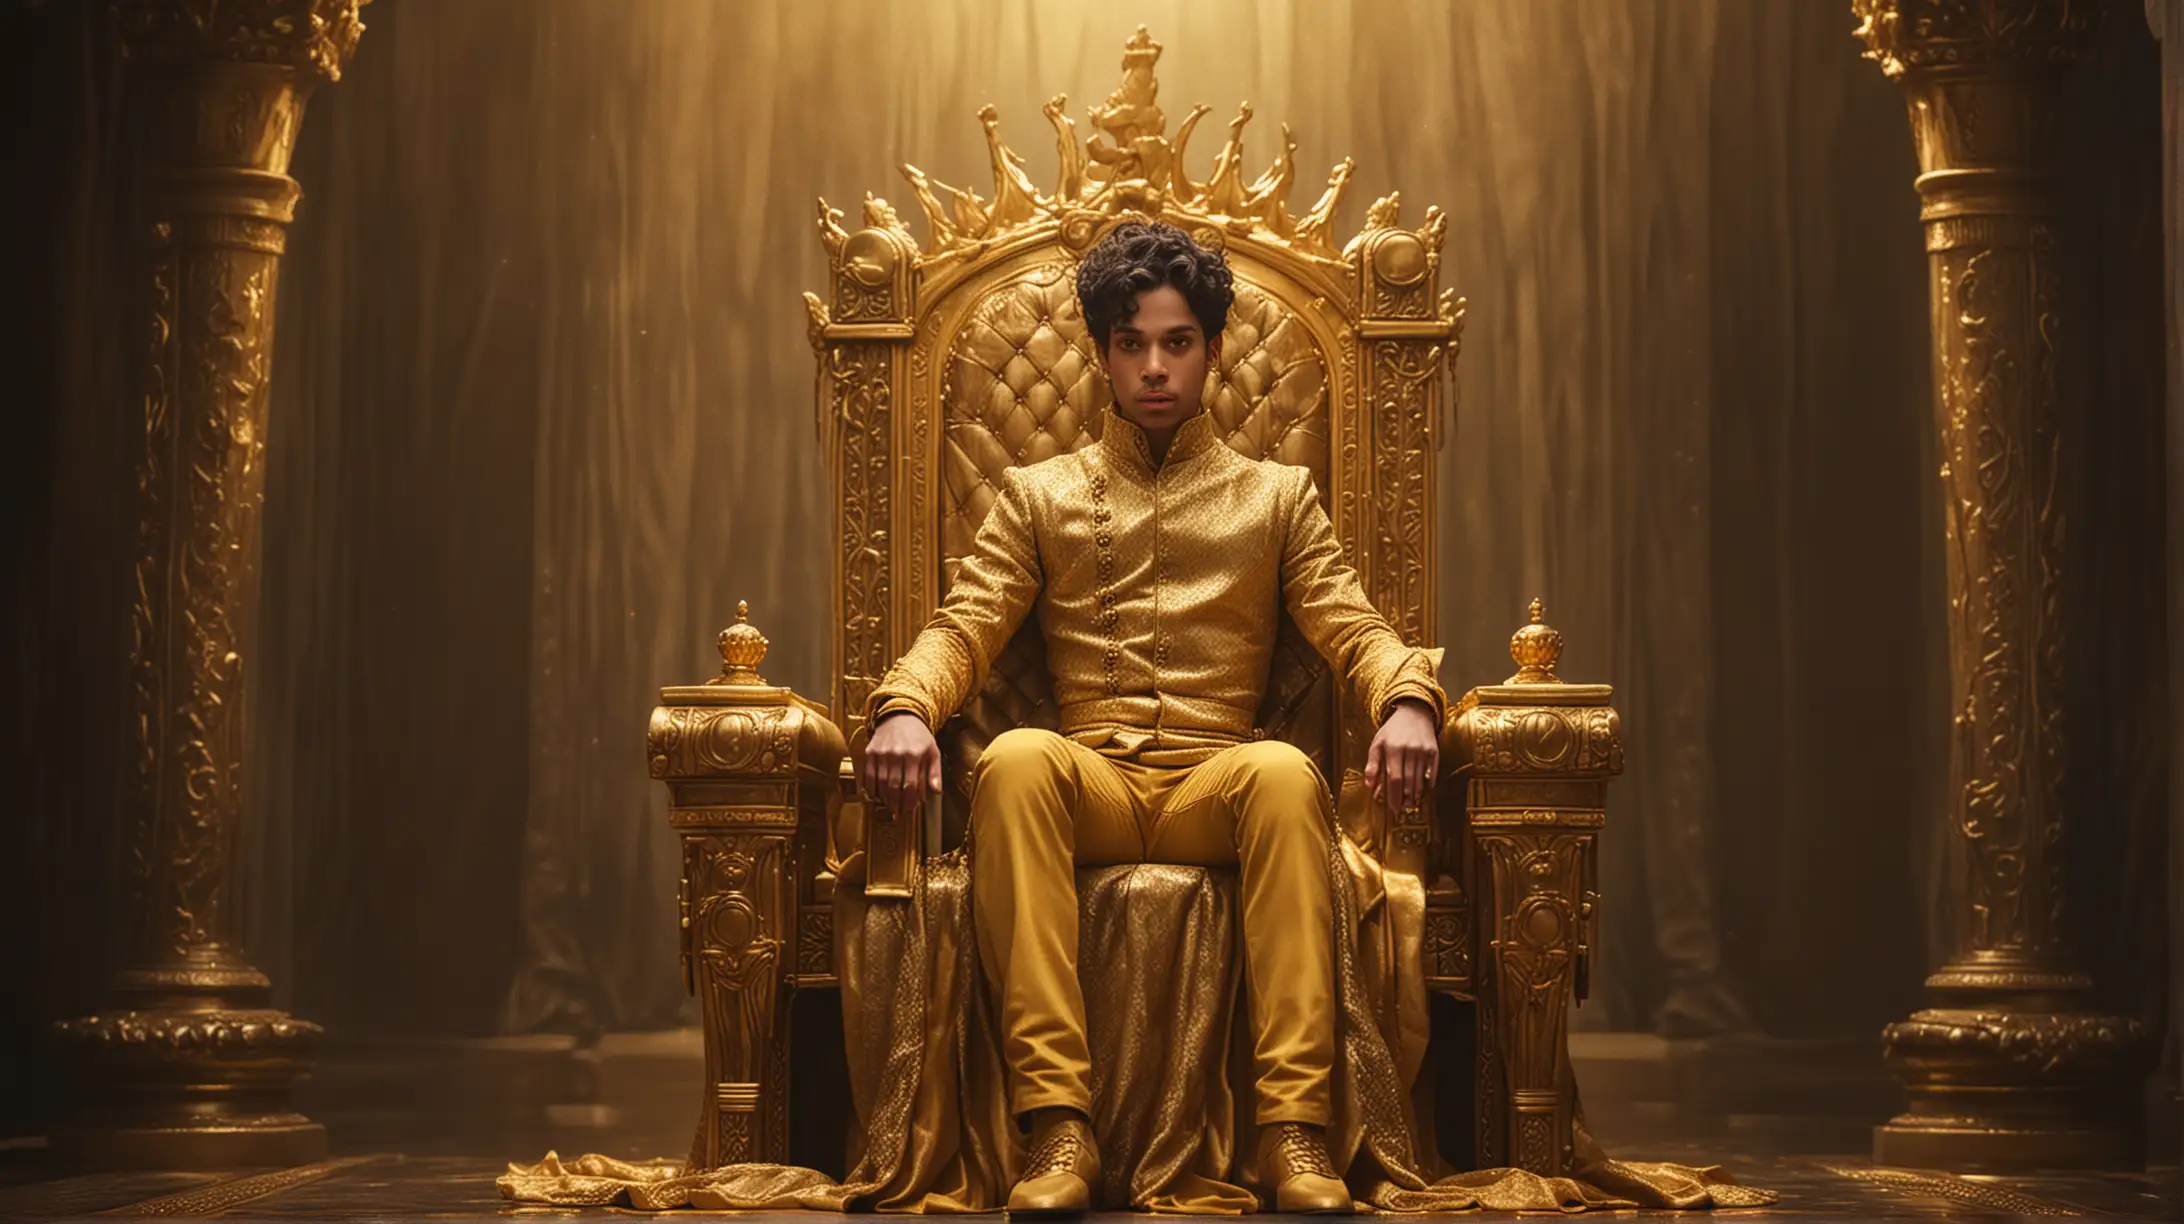 Royal Prince Sitting on a Majestic Golden Throne